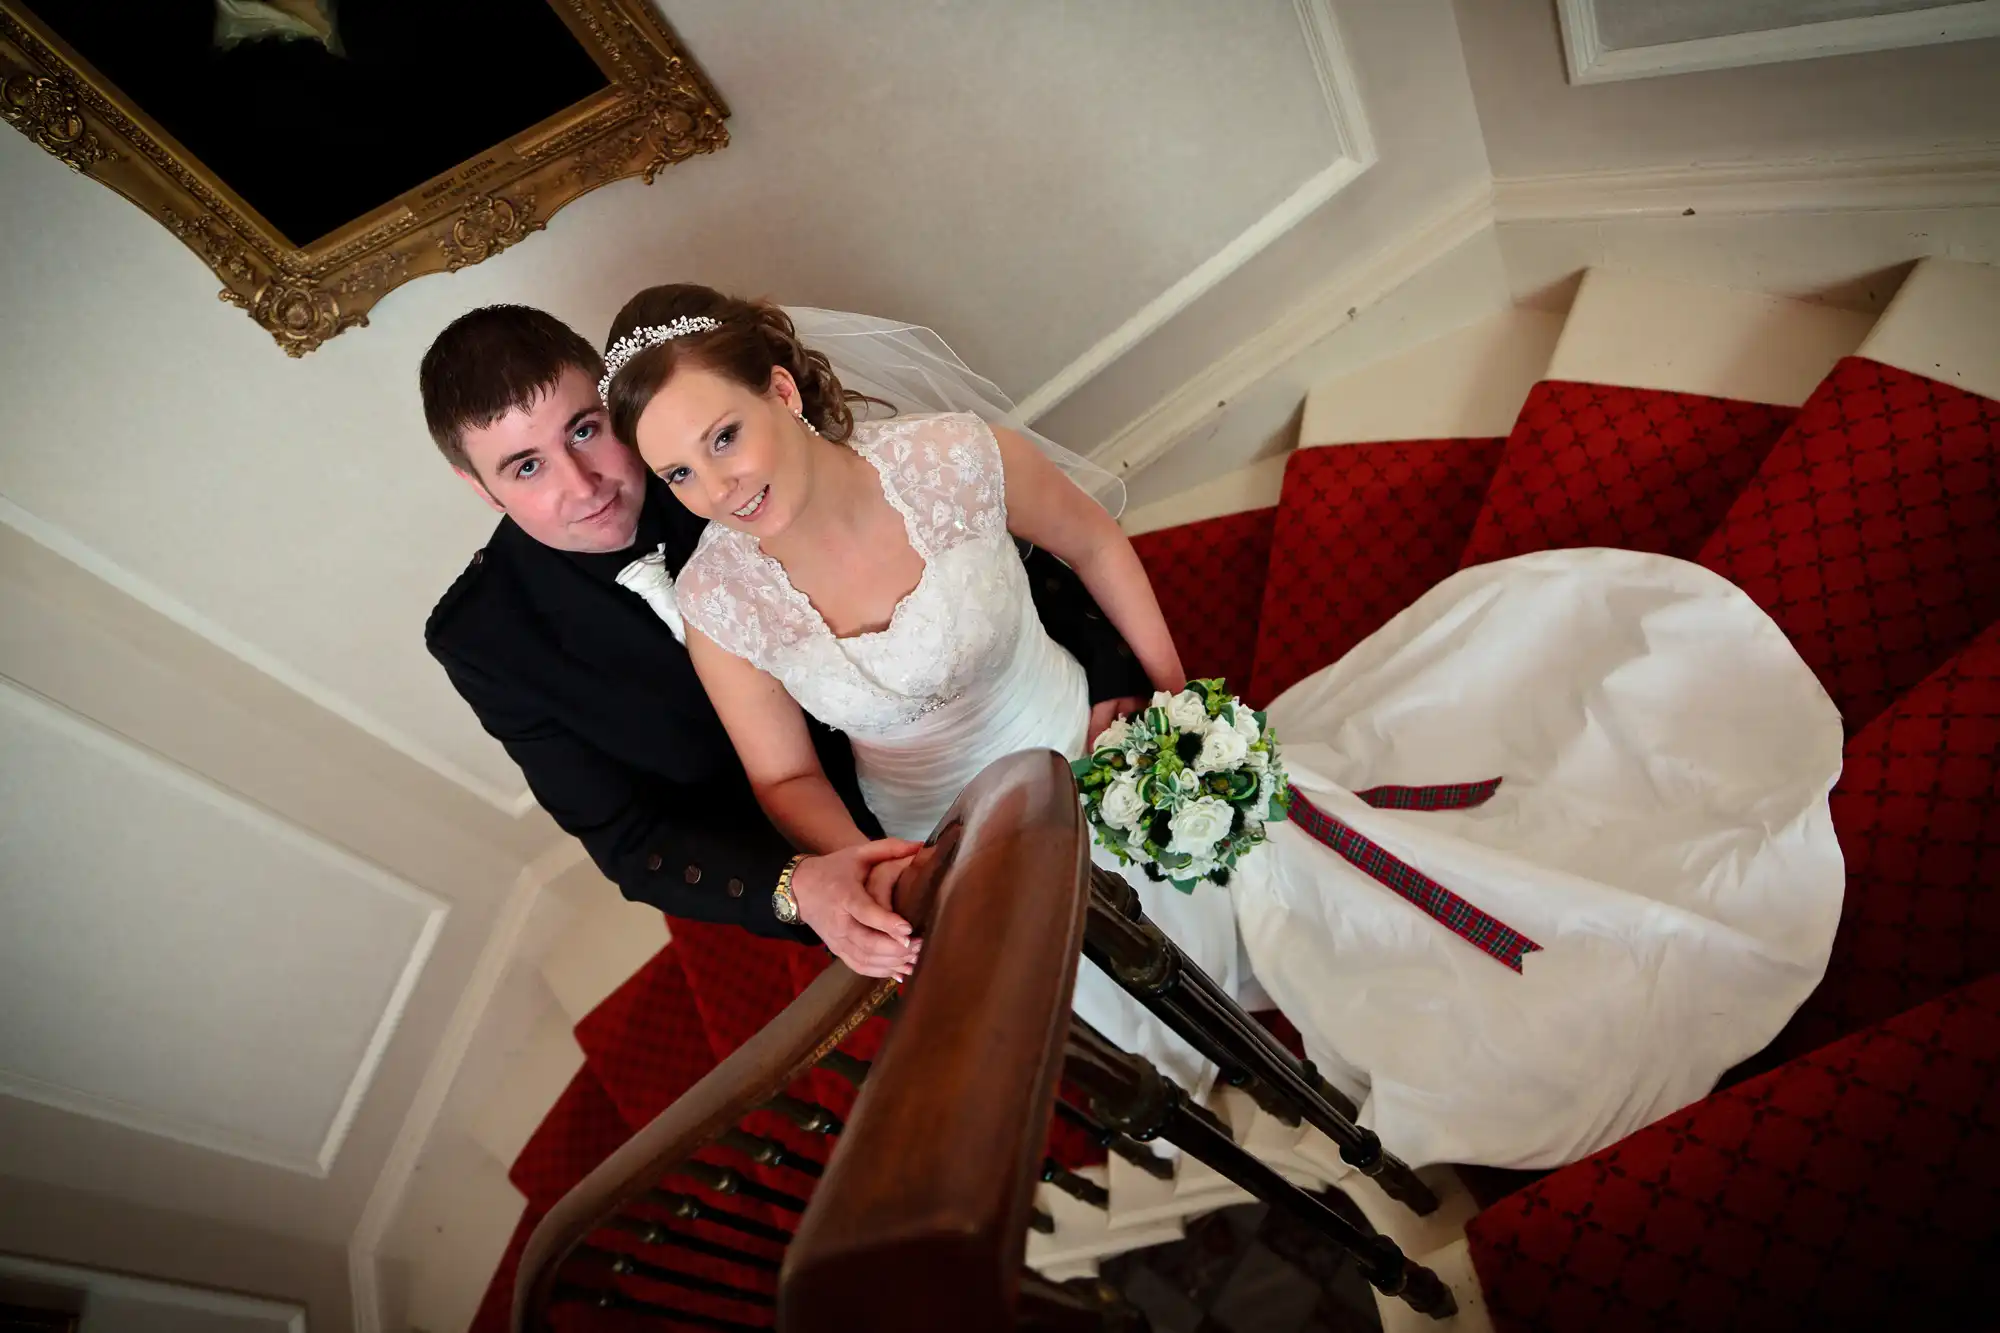 A newlywed couple posing on a staircase, the bride in a white gown and the groom in a dark suit, with a bouquet in hand.